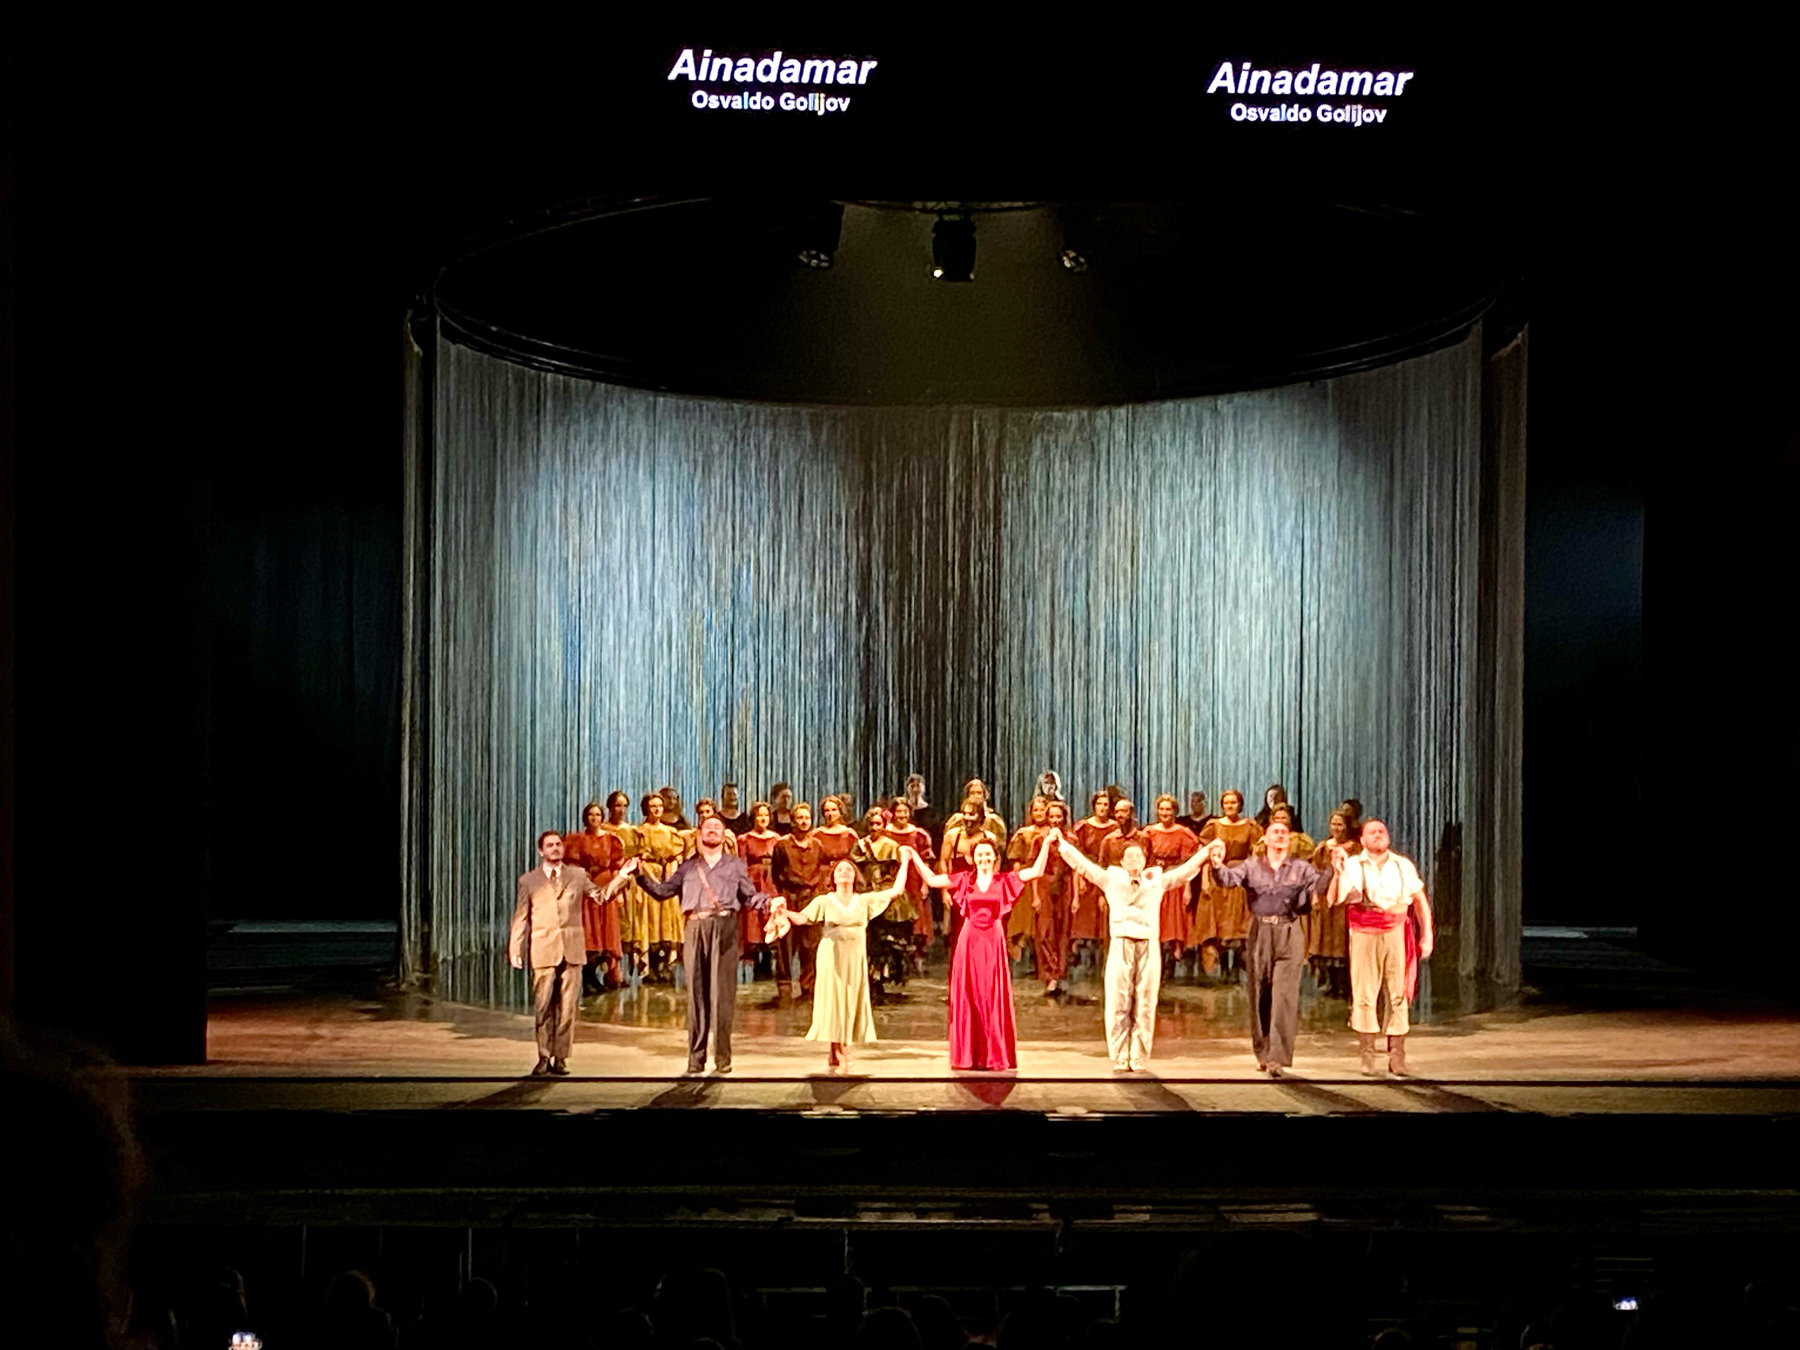 Colourful singers and dancers on brightly lit stage receiving applause at the end of a show